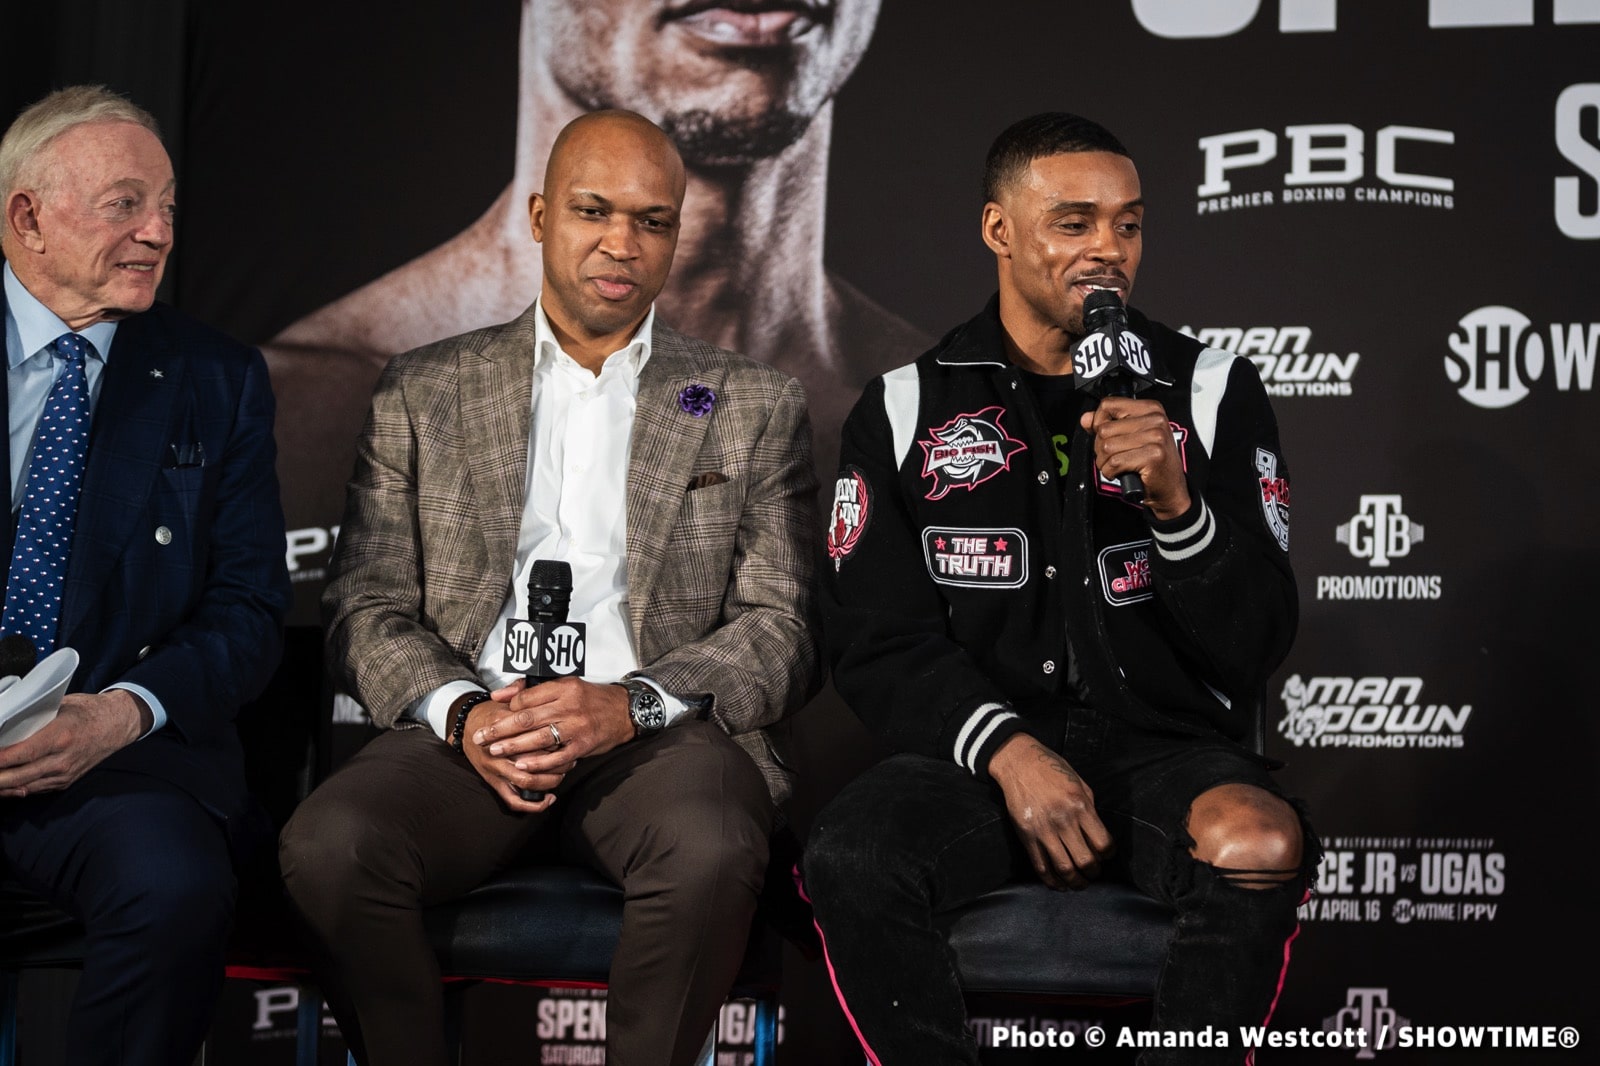 3 big undercard fights on Spence - Ugas card on April 16th